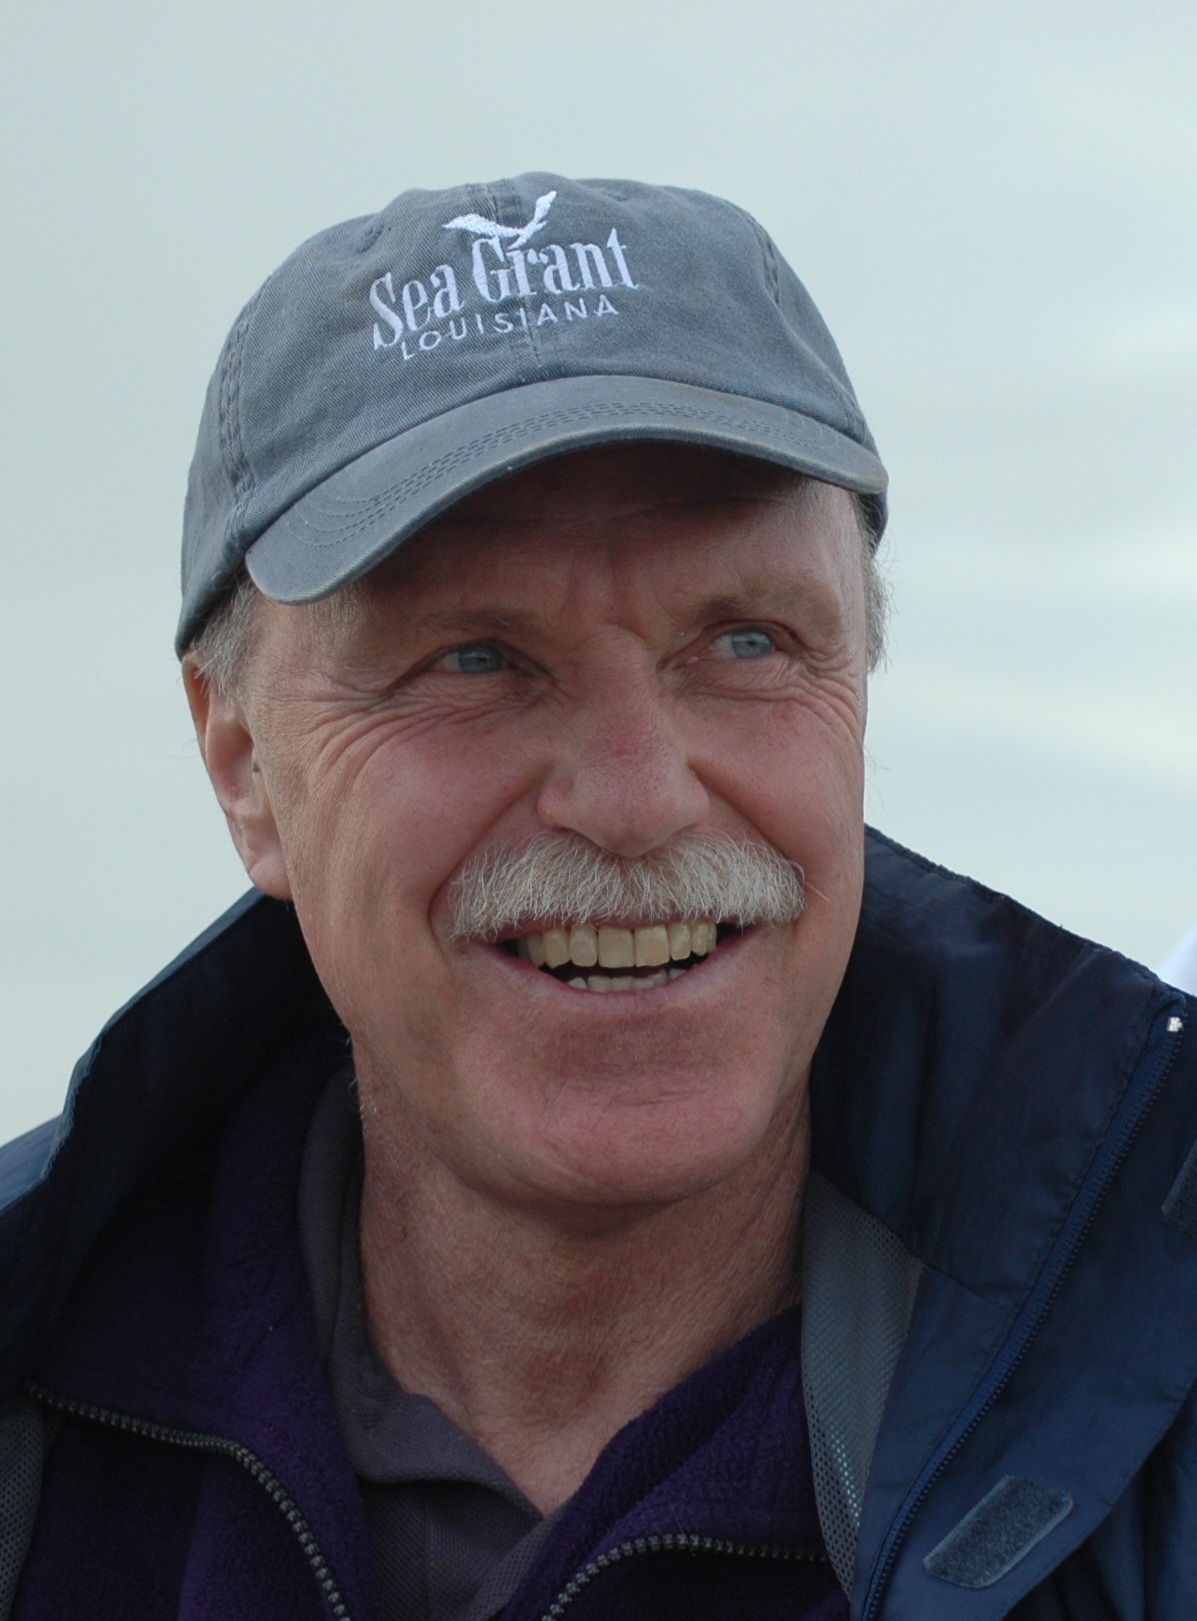 Ray Hilborn: Prominent US Fisheries Scientist to Visit Shetland to Discuss the Future of Seafood